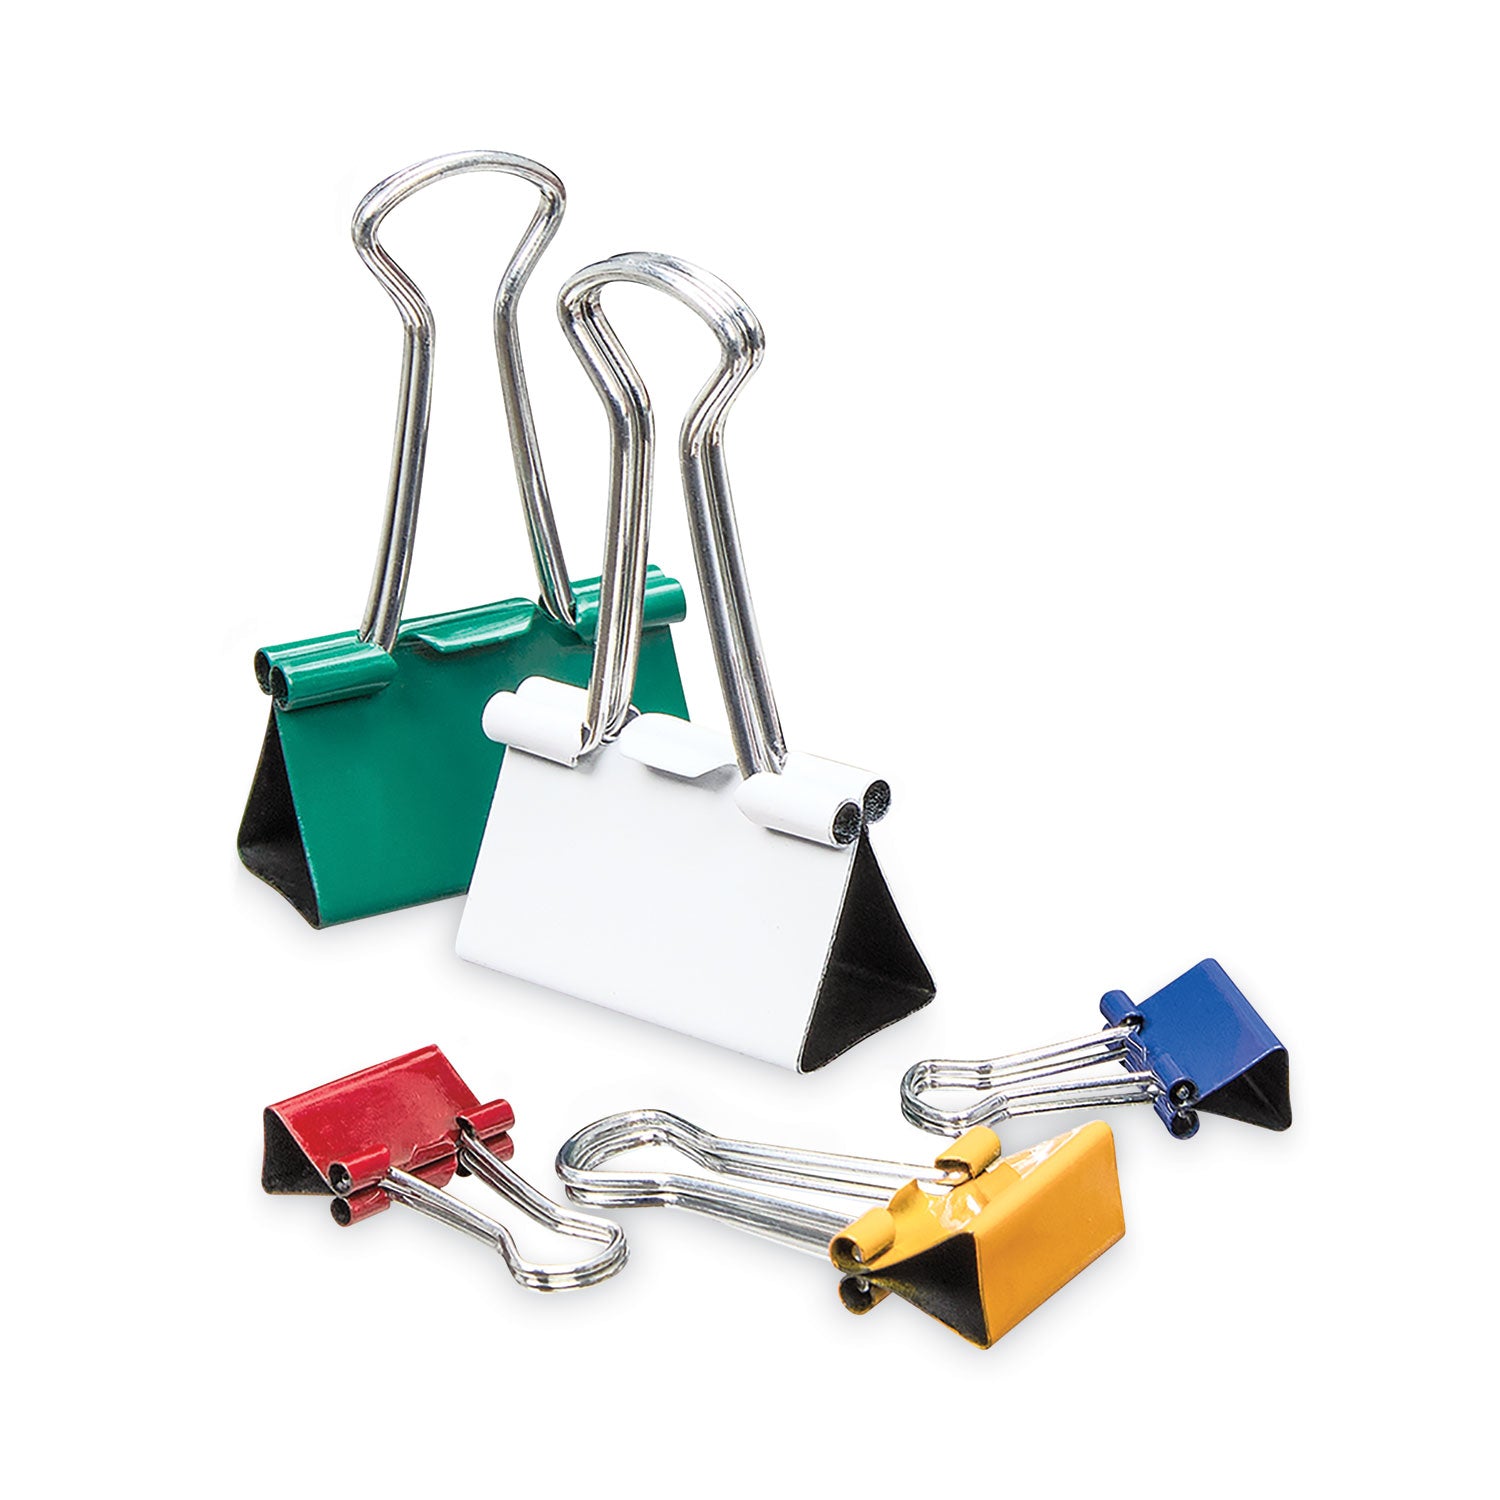 binder-clips-with-storage-tub-12-mini-05-12-small-075-6-medium-125-assorted-colors_unv31026 - 1